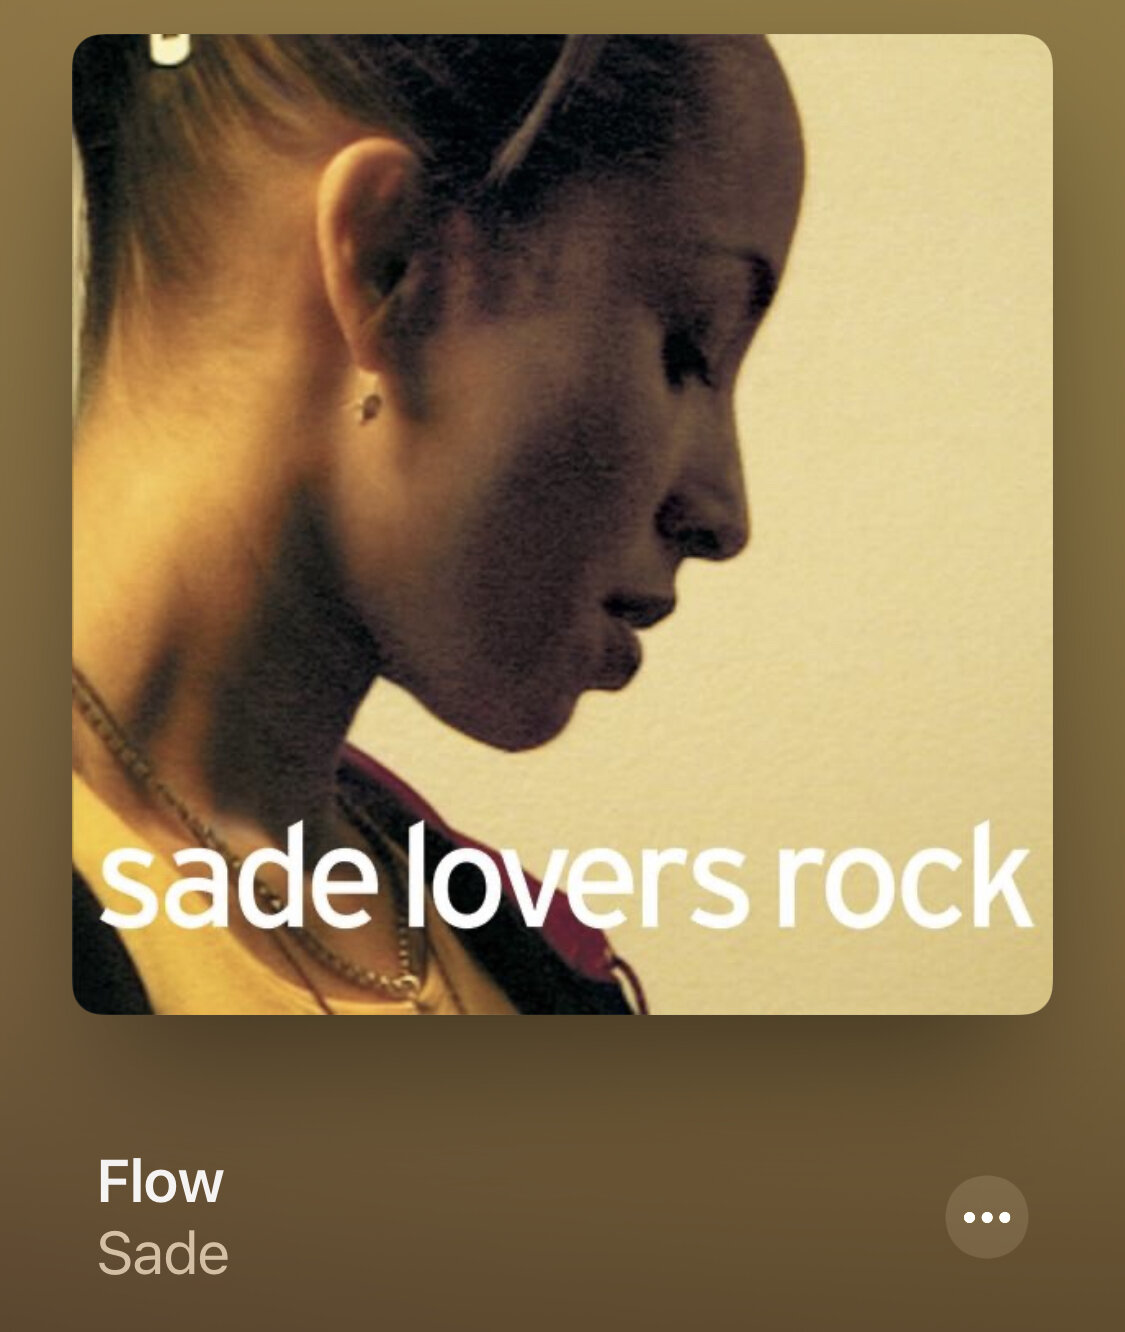  I told myself I wouldn’t include more than one Sade song (otherwise the entire playlist would revolve around Sade). This song in particular reminds me of love and how magical it can be.  